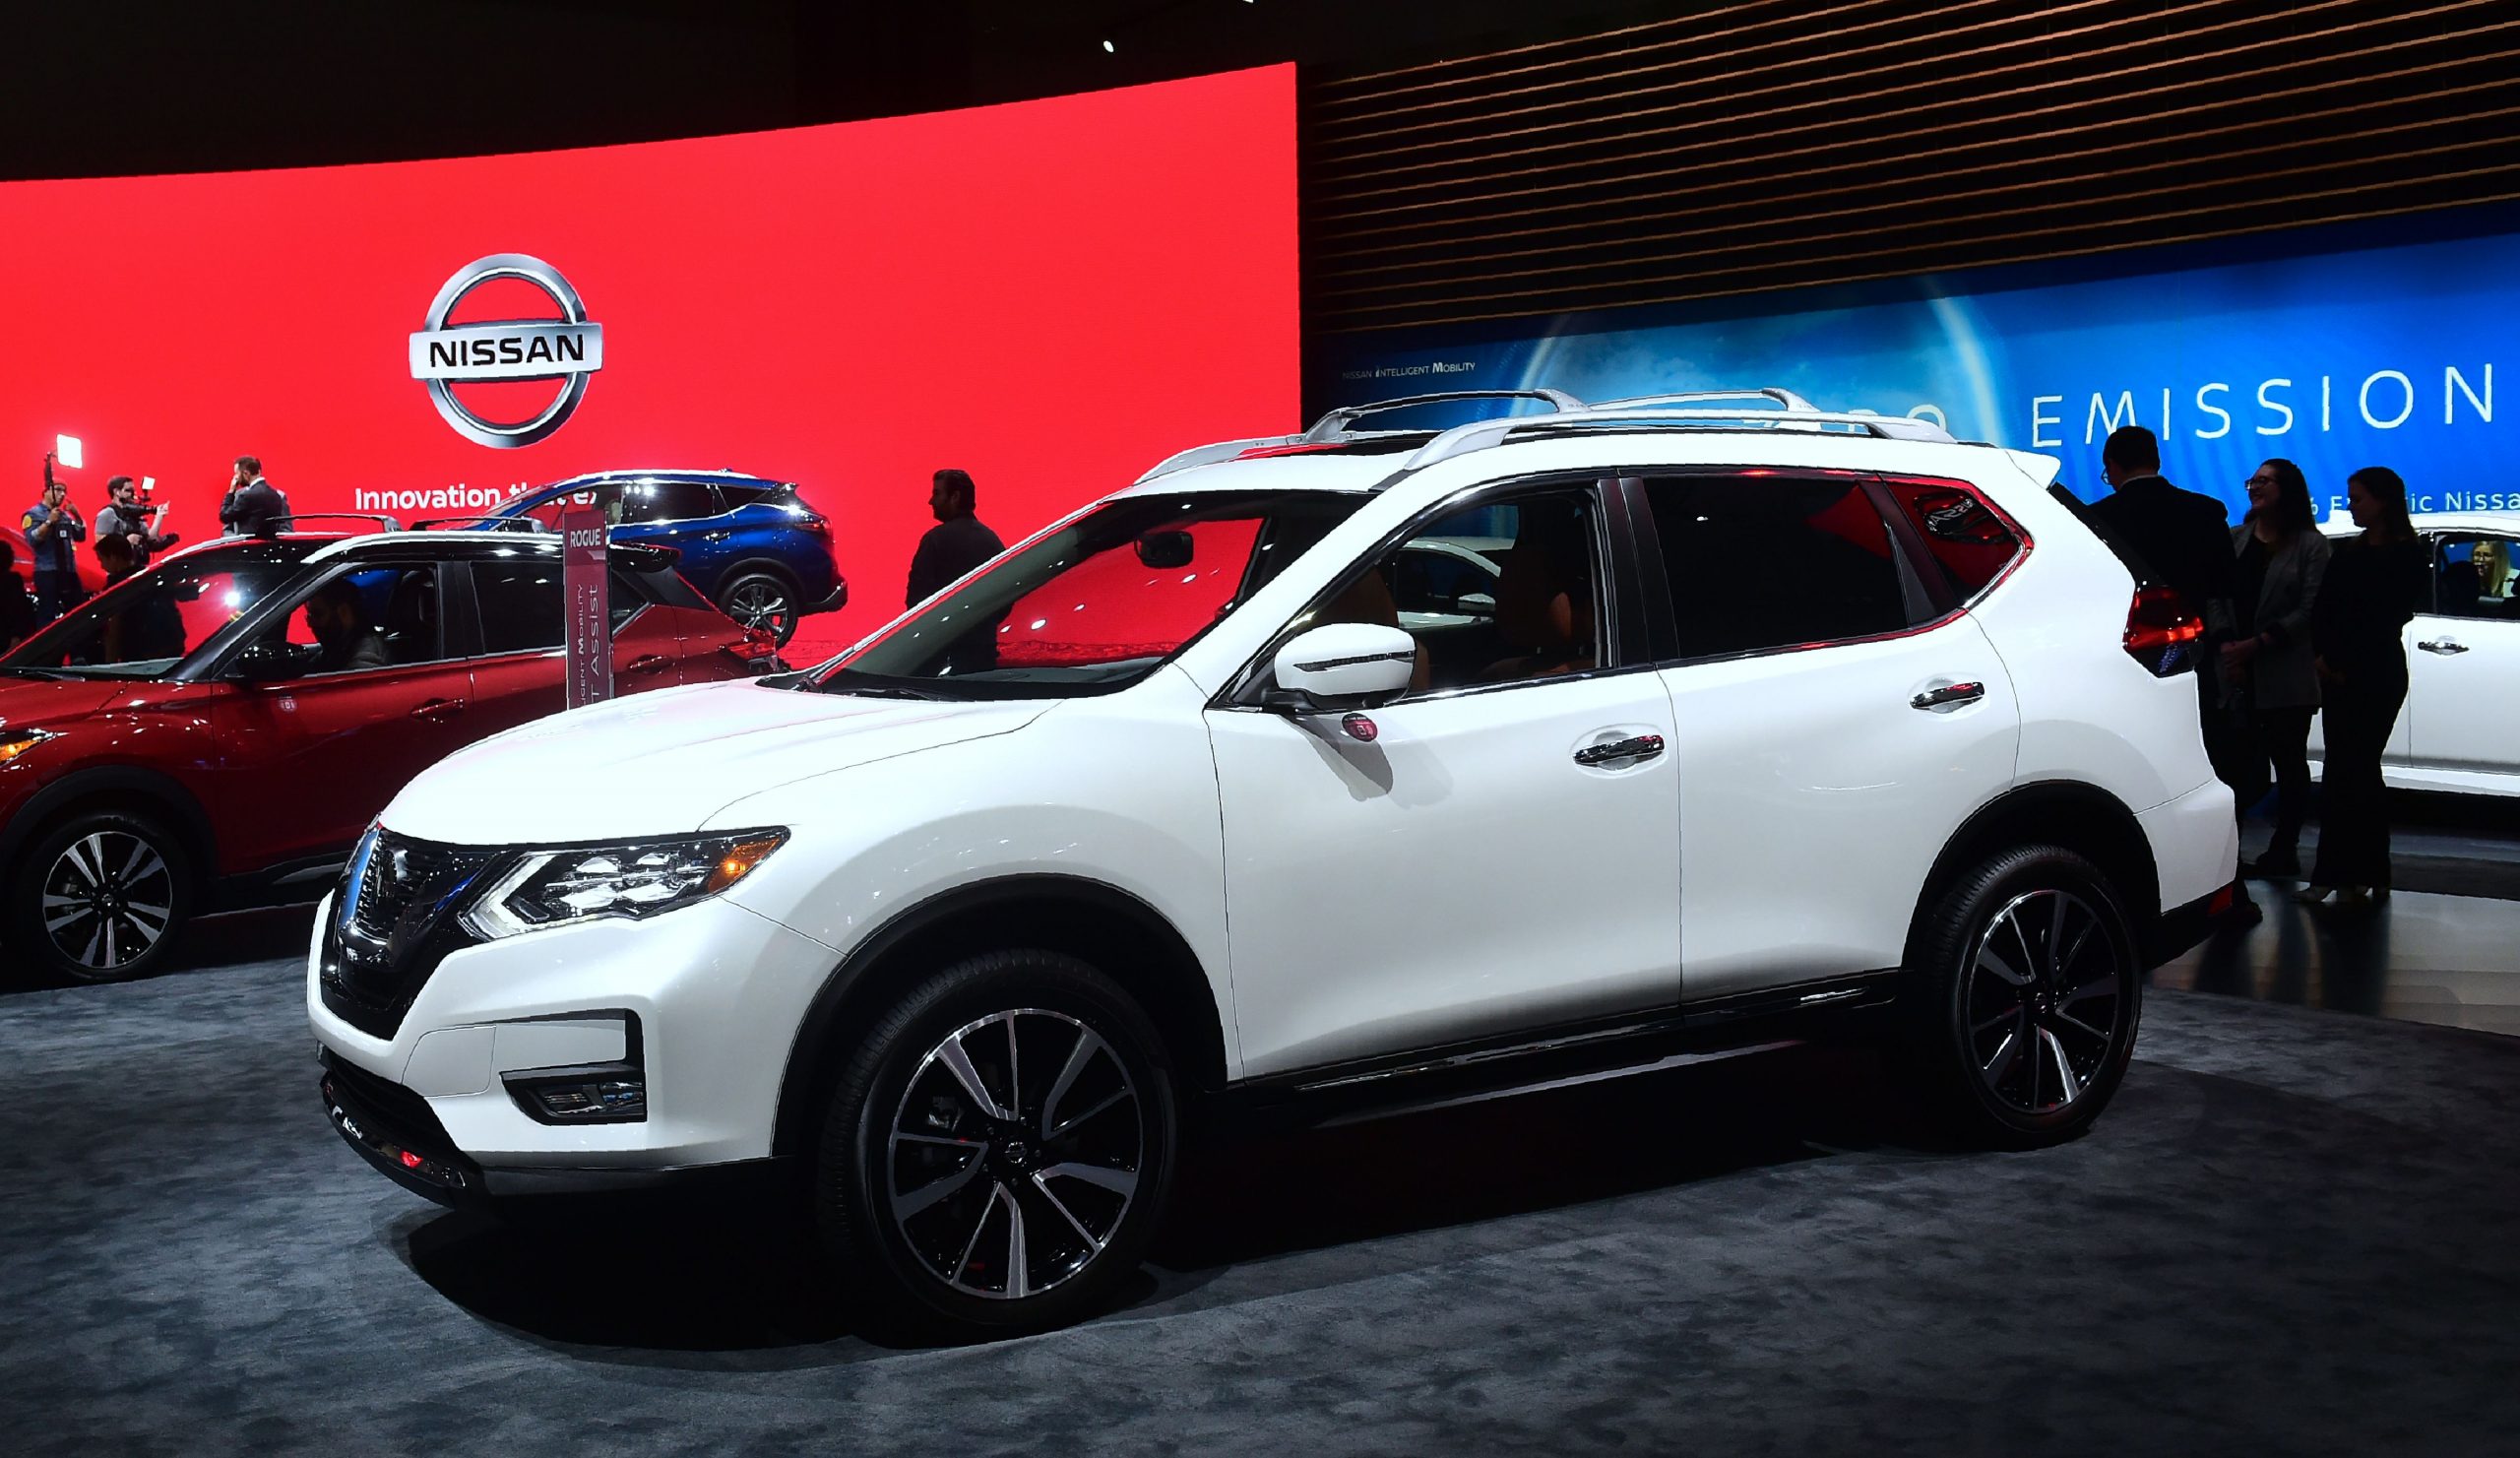 A white Nissan Rogue on display at an auto show